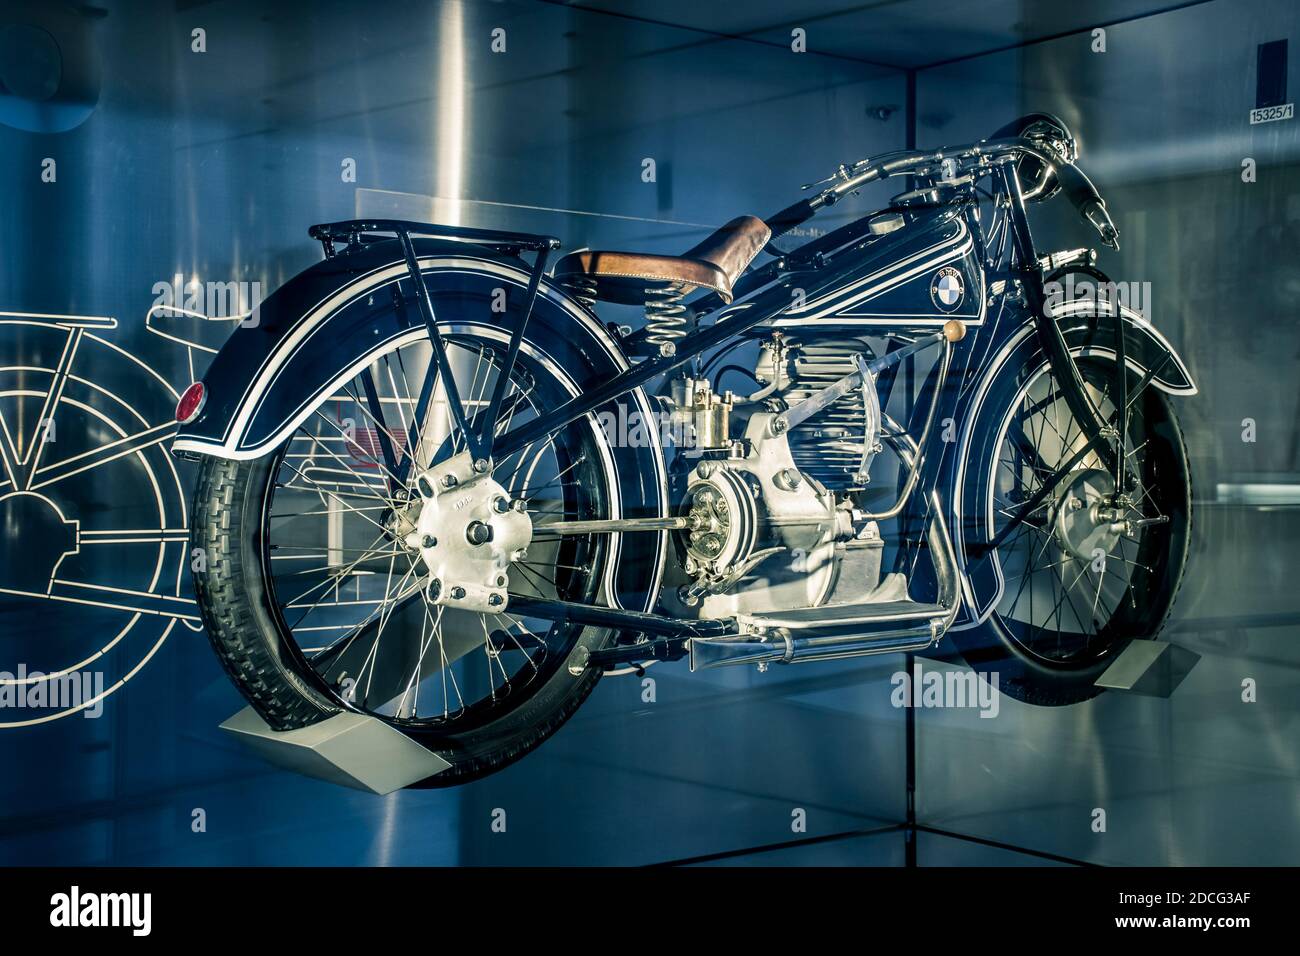 Munich/ Germany - May, 24 2019: 1929 classic motocycle in BMW Museum/ BMW Welt Stock Photo